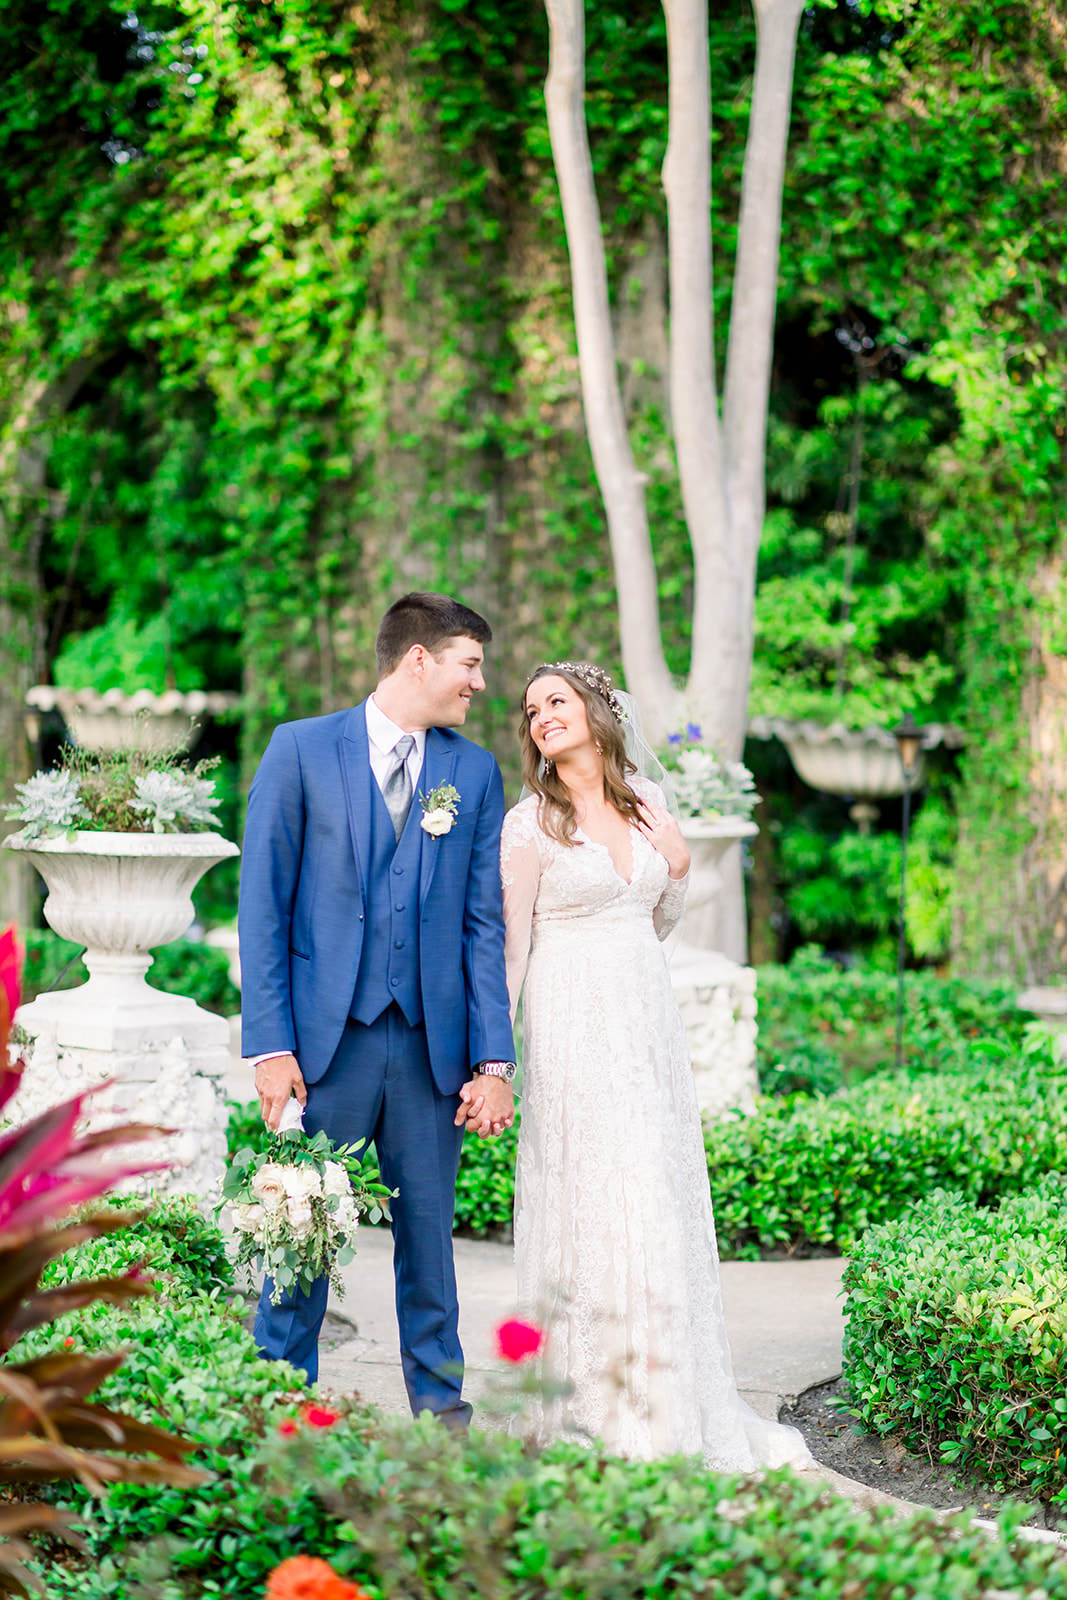 Boho Inspired Florida Bride and Groom in Outdoor Garden Courtyard, Groom in Navy Suit, Bride Holding White Floral Bouquet with Greenery Wedding Portrait | Tampa Bay Wedding Photographers Shauna and Jordon Photography